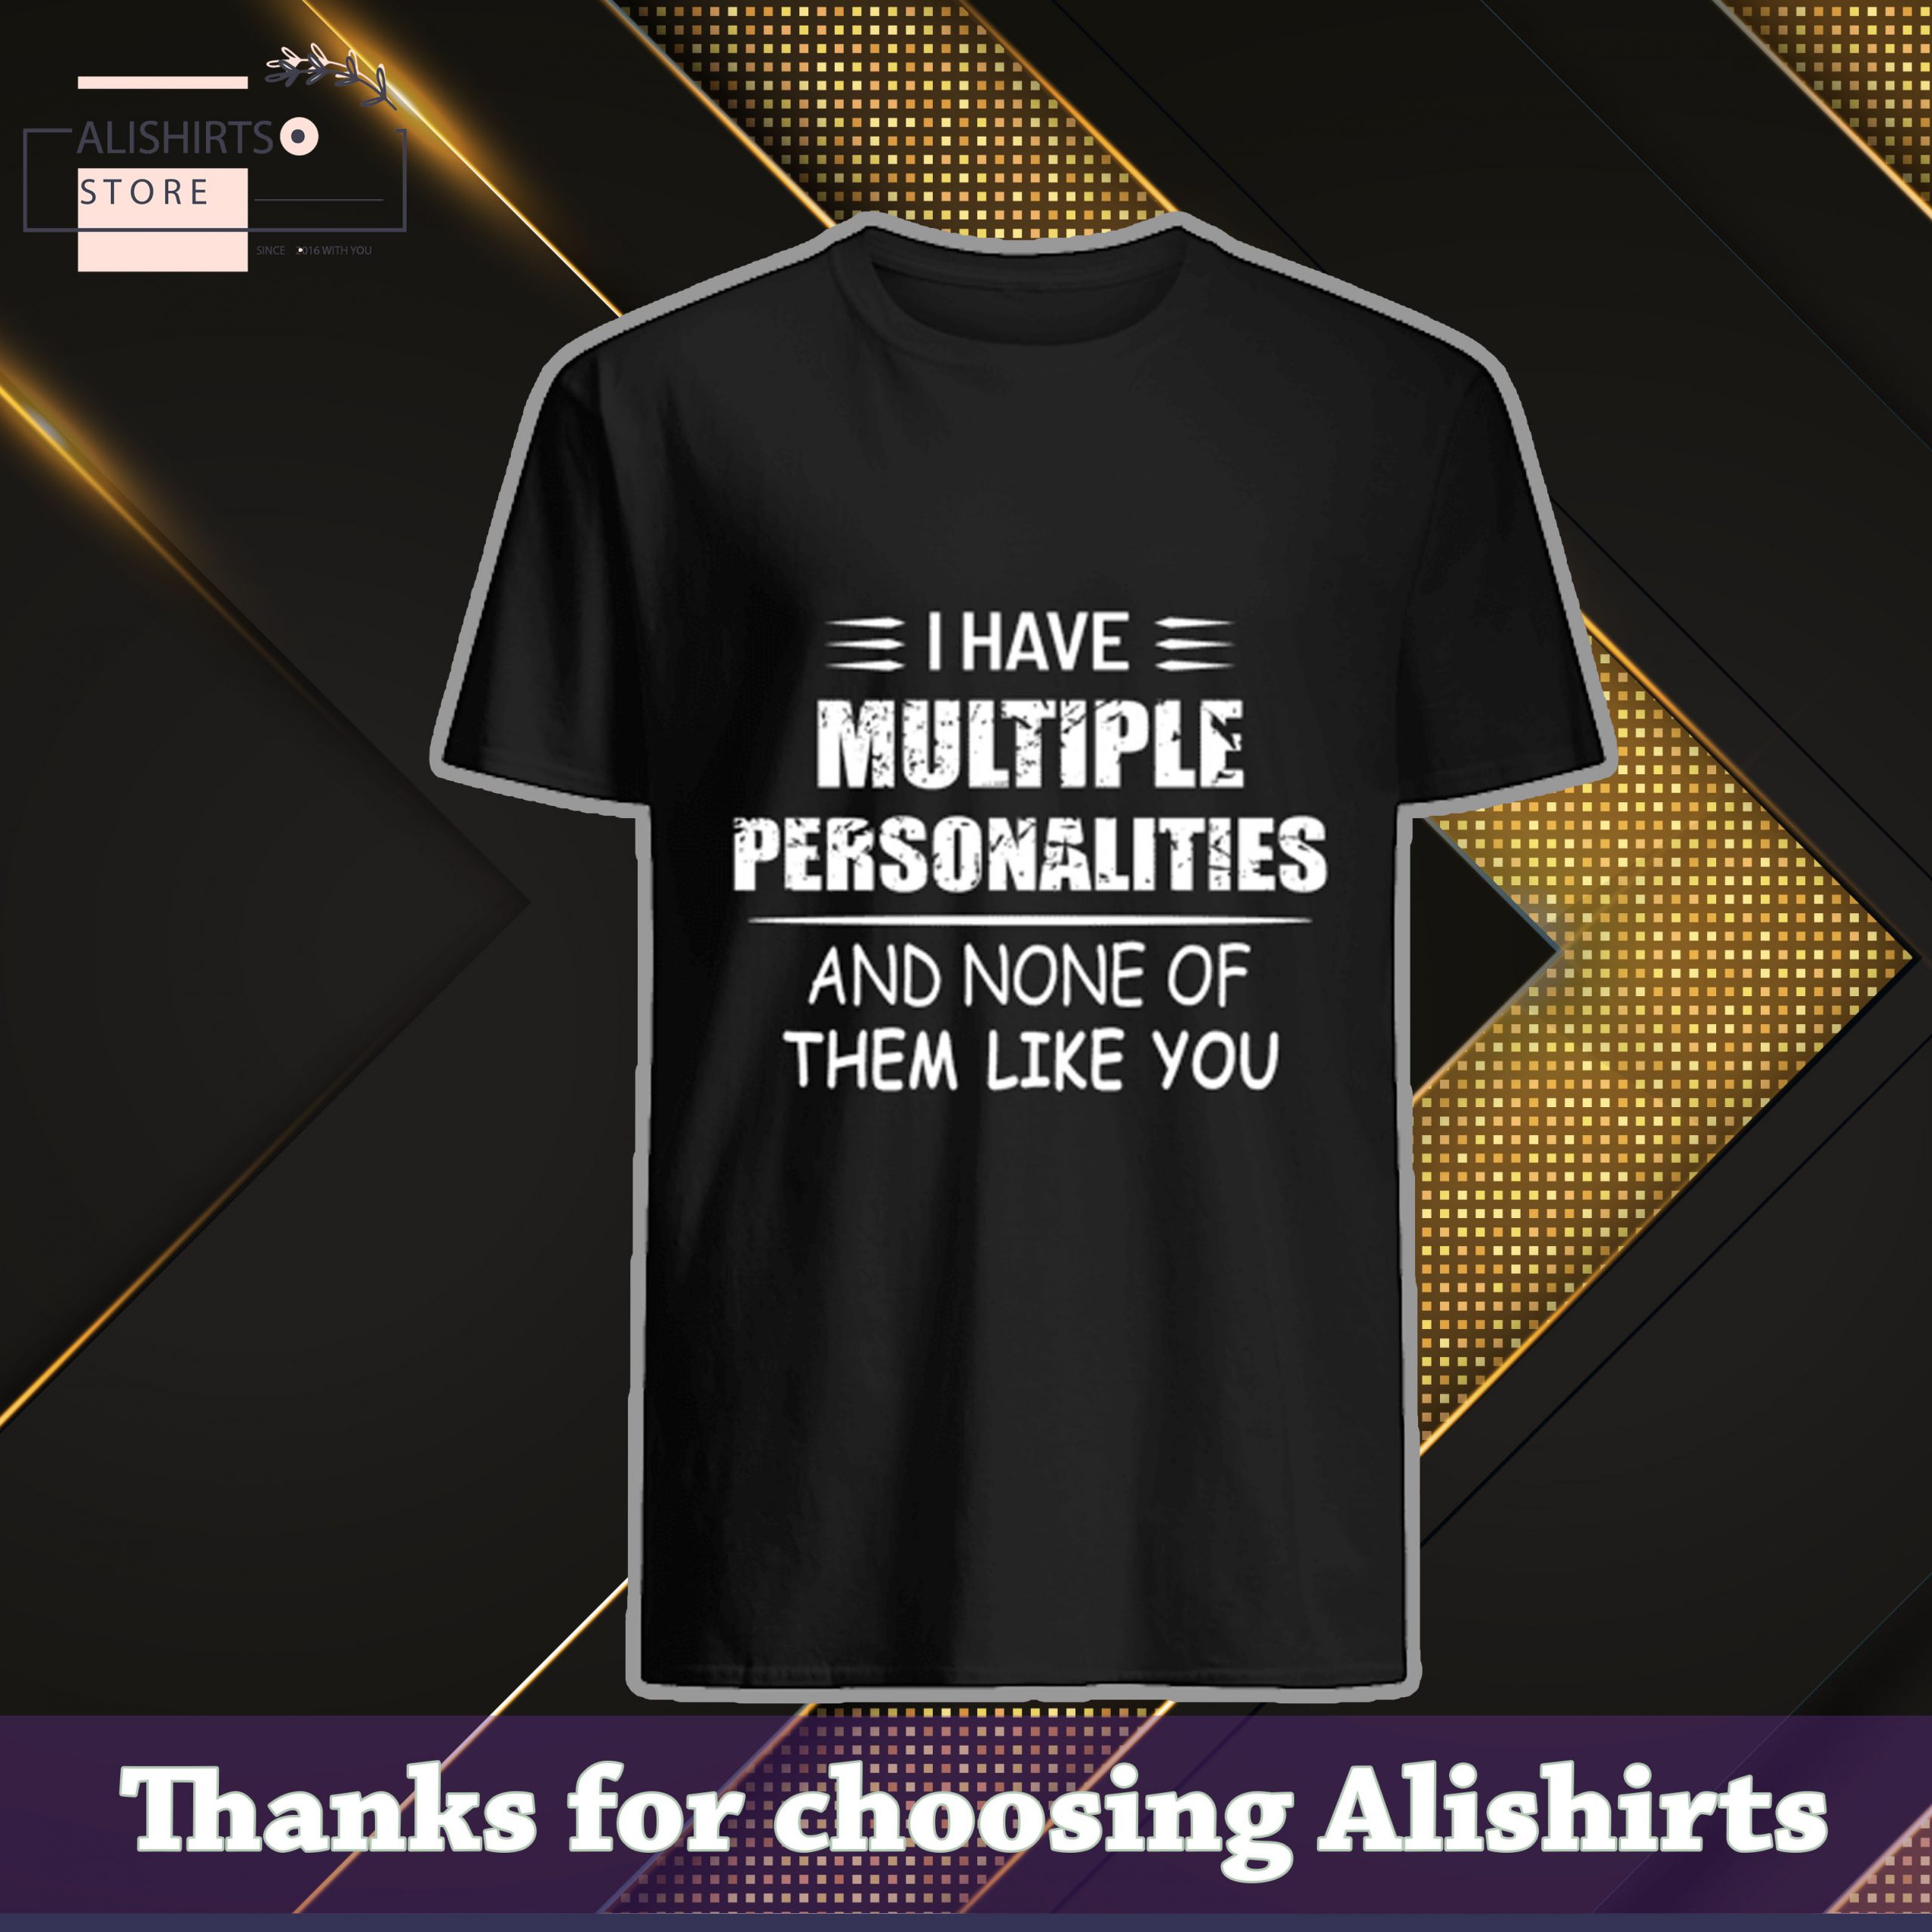 I have multiple personalities and none of them like you shirts